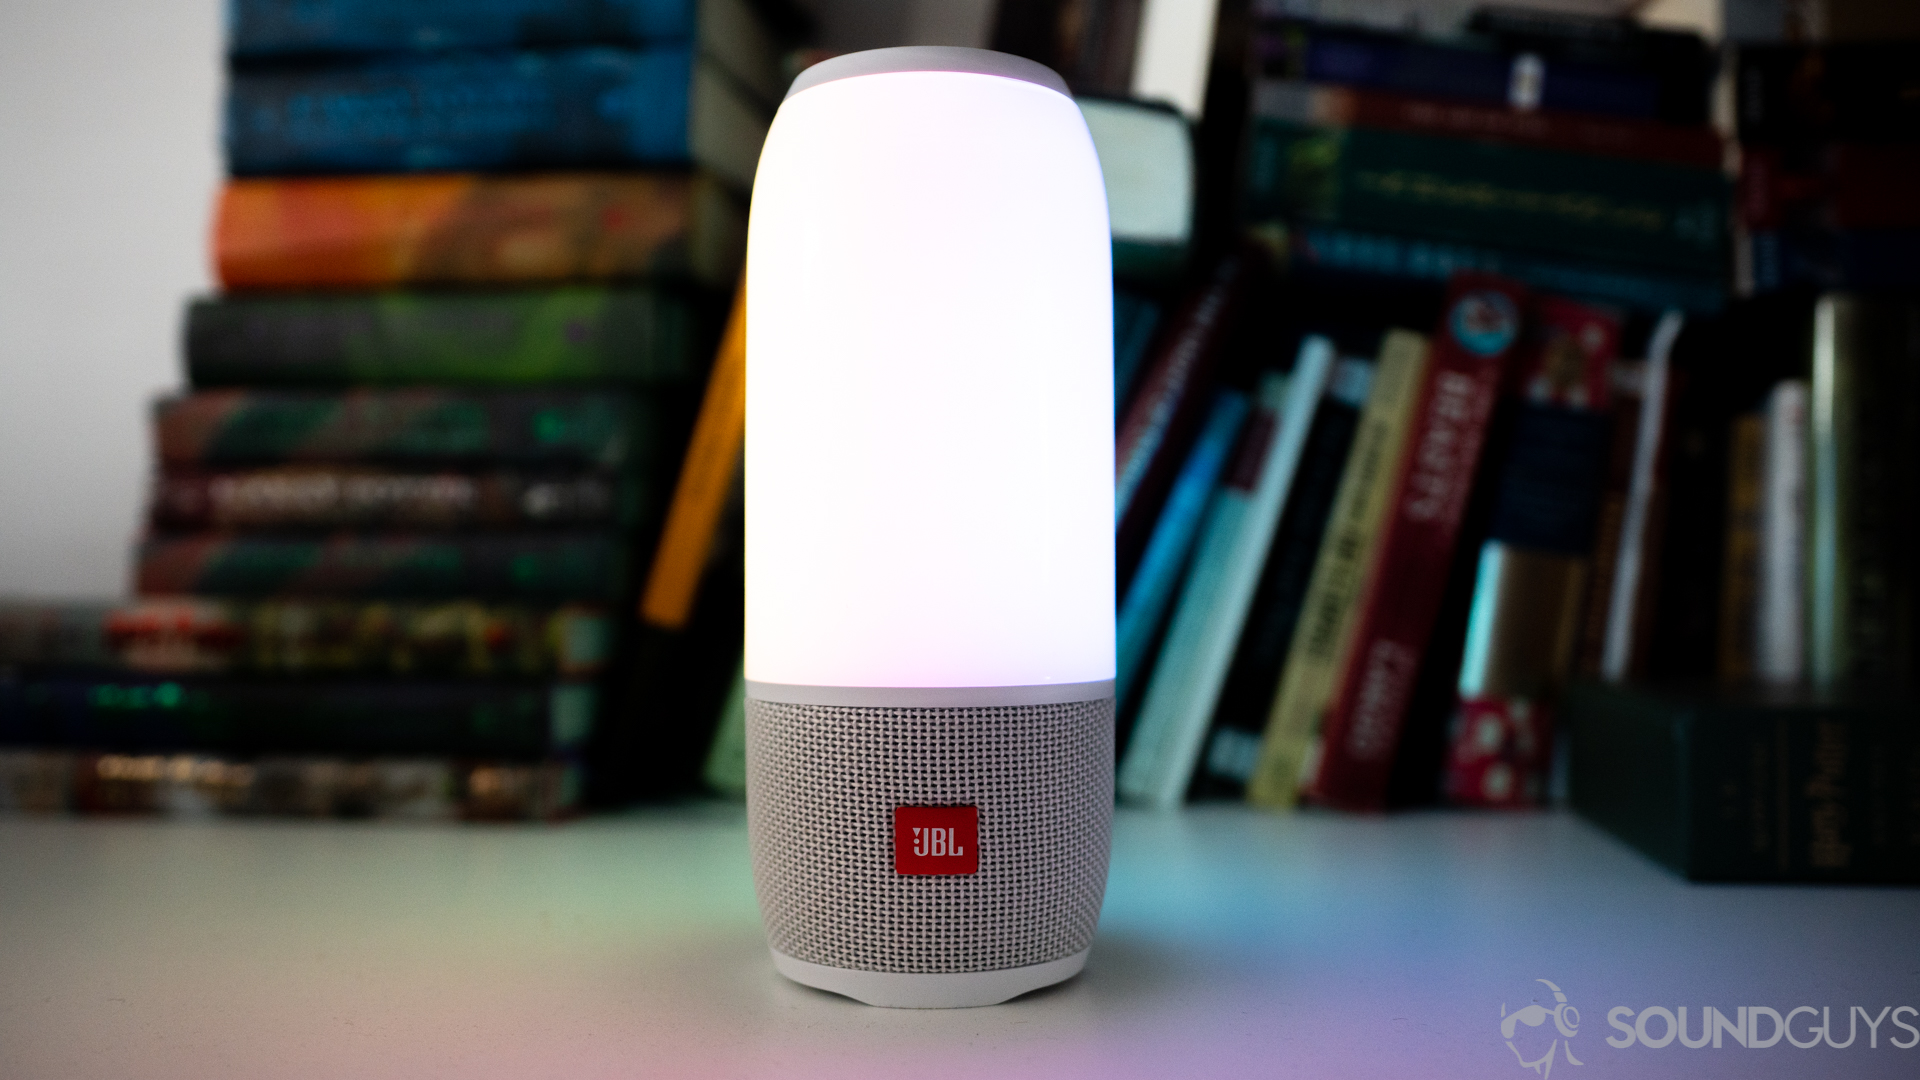 The white JBL Pulse 3 in front of colorful books on a white desk.